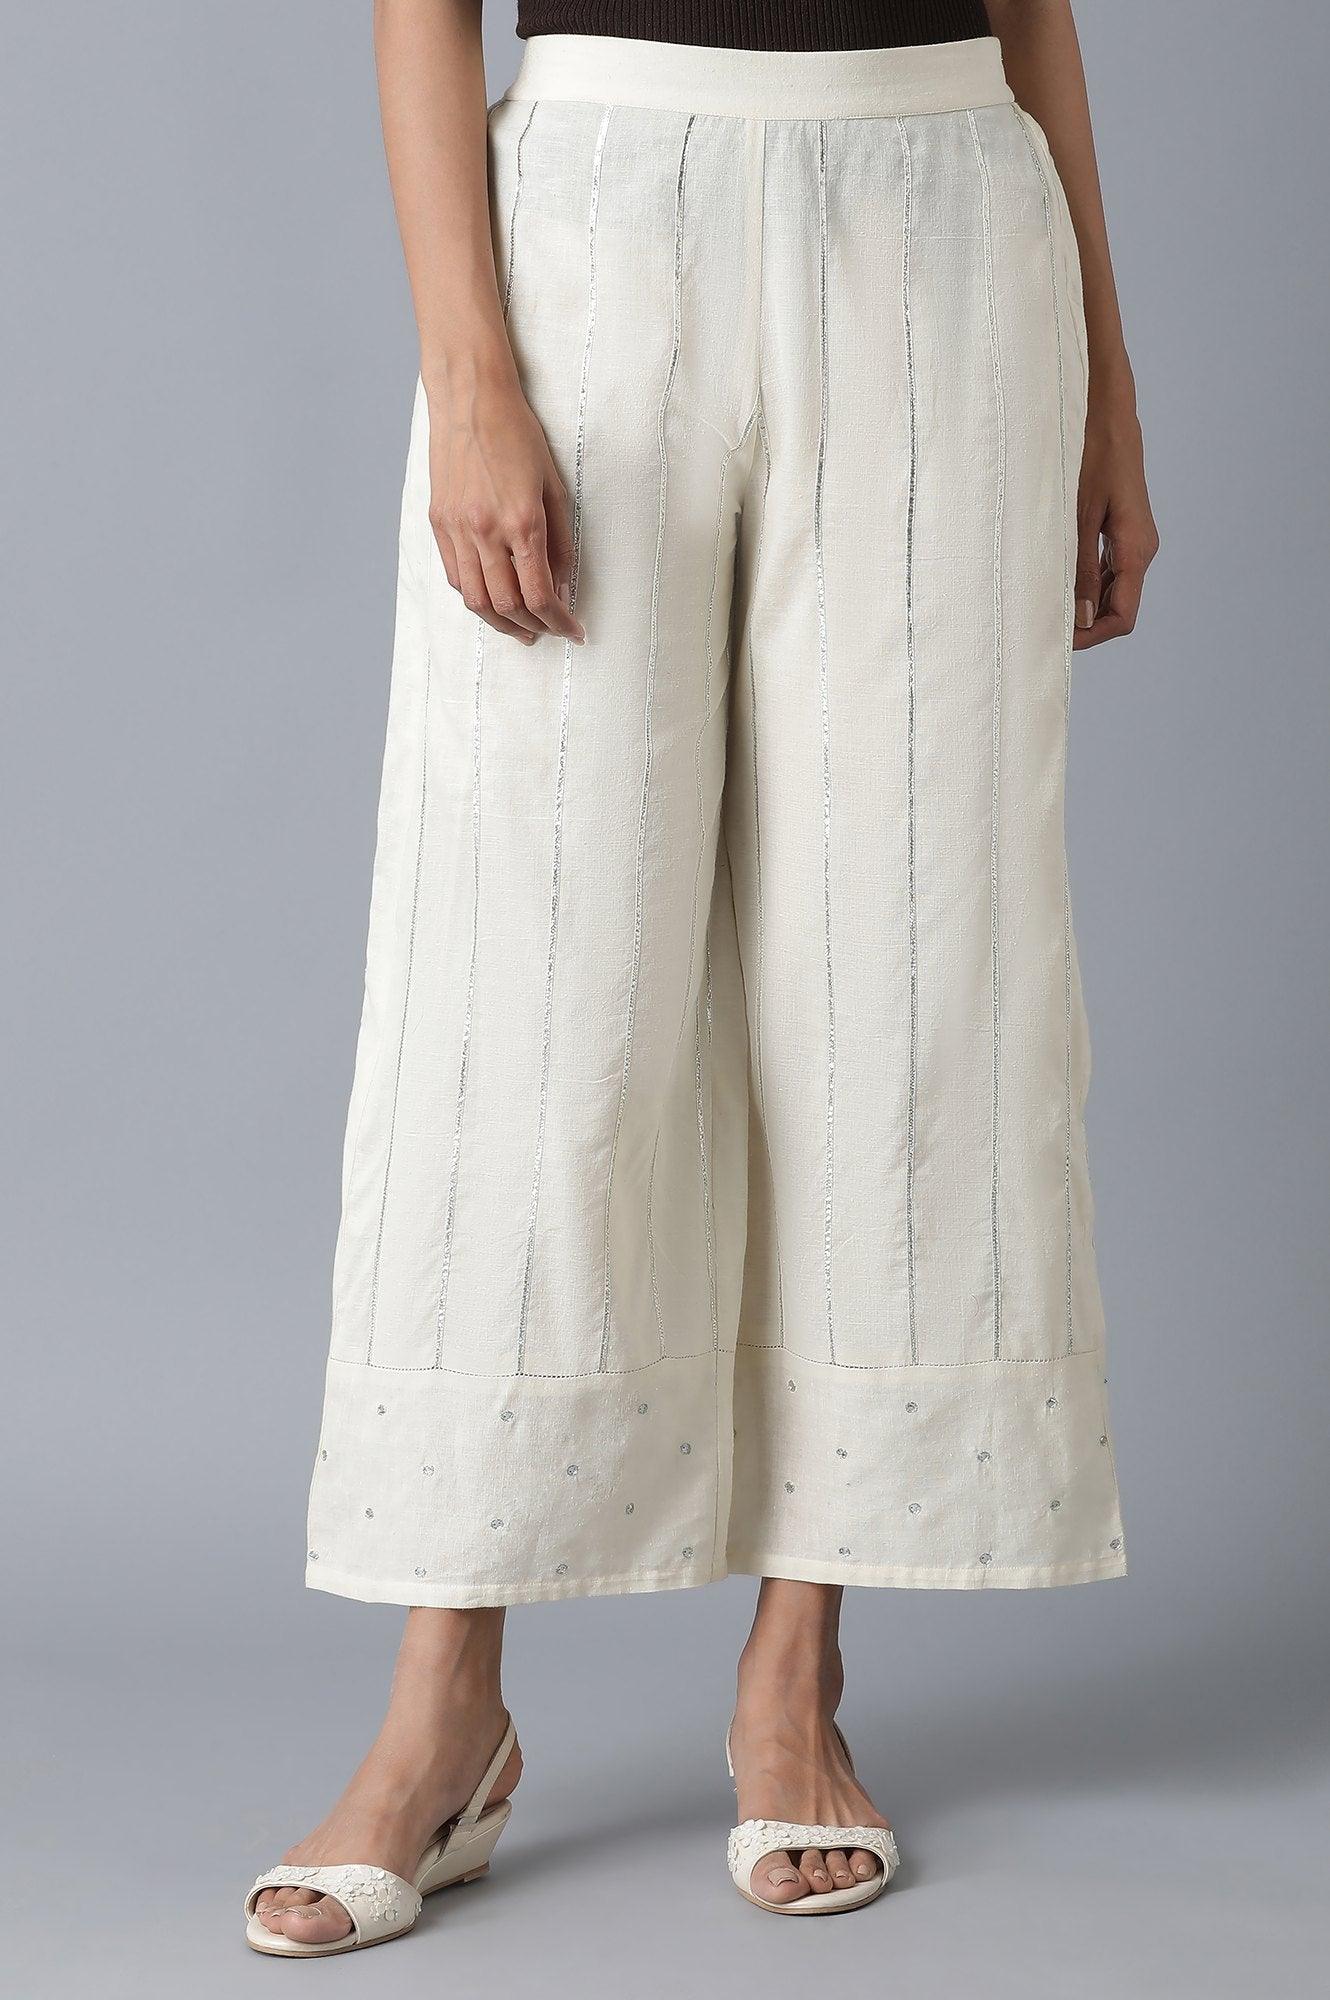 Ecru Parallel Pants with Embroidered Hem - wforwoman